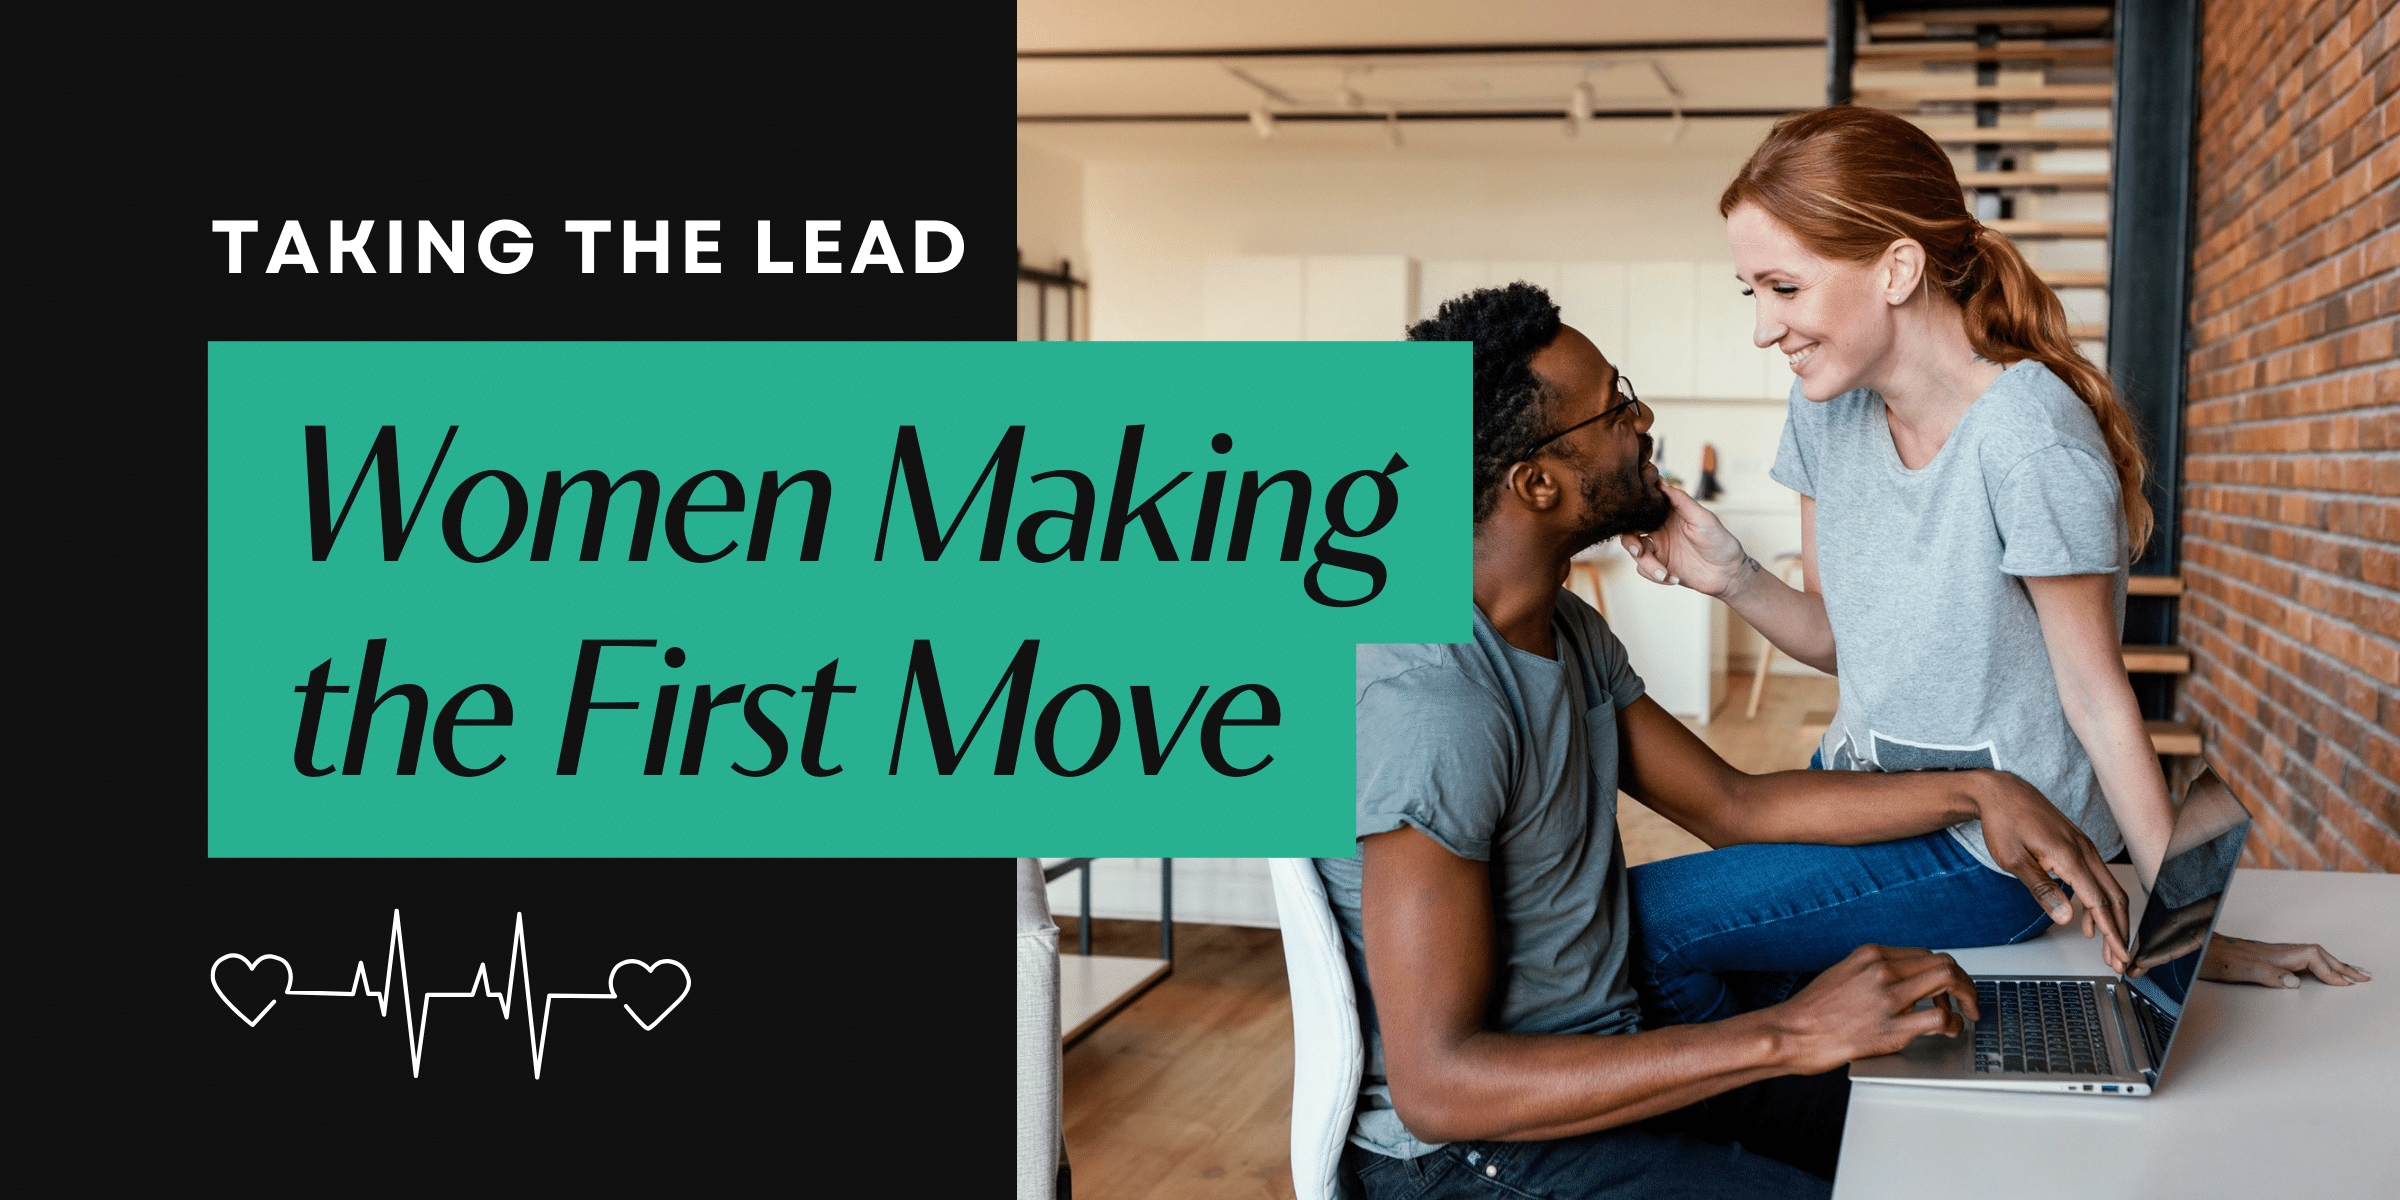 There’s no time like the present—learn how to make the first move on a guy and take control of your dating life. Women making the first move can feel empowered!